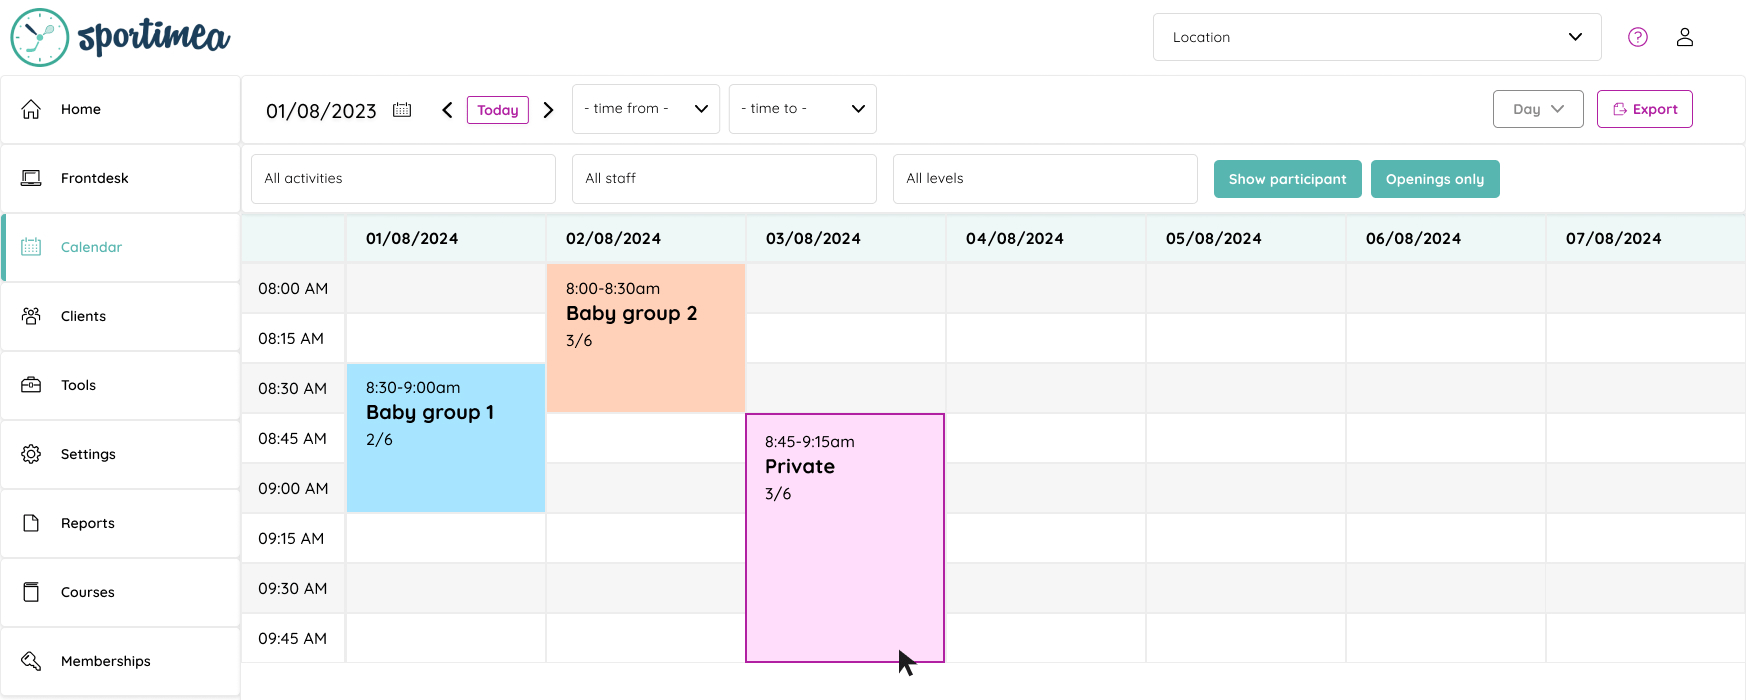 sportimea visual drag and drop scheduling